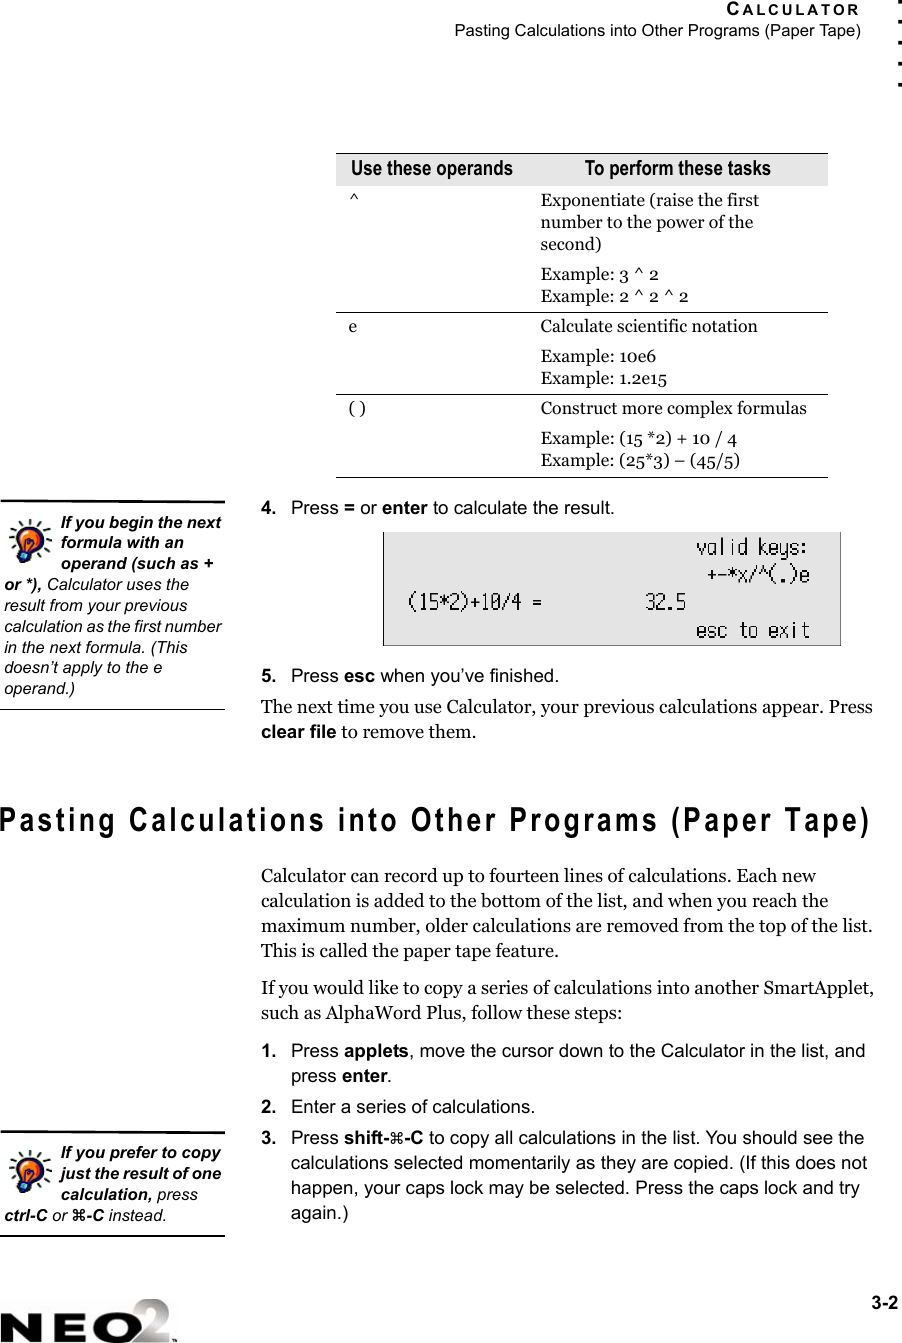 CALCULATORPasting Calculations into Other Programs (Paper Tape)3-2. . . . .4. Press = or enter to calculate the result.5. Press esc when you’ve finished.The next time you use Calculator, your previous calculations appear. Press clear file to remove them.Pasting Calculations into Other Programs (Paper Tape)Calculator can record up to fourteen lines of calculations. Each new calculation is added to the bottom of the list, and when you reach the maximum number, older calculations are removed from the top of the list. This is called the paper tape feature.If you would like to copy a series of calculations into another SmartApplet, such as AlphaWord Plus, follow these steps:1. Press applets, move the cursor down to the Calculator in the list, and press enter.2. Enter a series of calculations.3. Press shift-a-C to copy all calculations in the list. You should see the calculations selected momentarily as they are copied. (If this does not happen, your caps lock may be selected. Press the caps lock and try again.)^ Exponentiate (raise the first number to the power of the second)Example: 3 ^ 2Example: 2 ^ 2 ^ 2e Calculate scientific notation Example: 10e6Example: 1.2e15( ) Construct more complex formulasExample: (15 *2) + 10 / 4Example: (25*3) – (45/5)Use these operands To perform these tasksIf you begin the next formula with an operand (such as + or *), Calculator uses the result from your previous calculation as the first number in the next formula. (This doesn’t apply to the e operand.)If you prefer to copy just the result of one calculation, press ctrl-C or z-C instead.